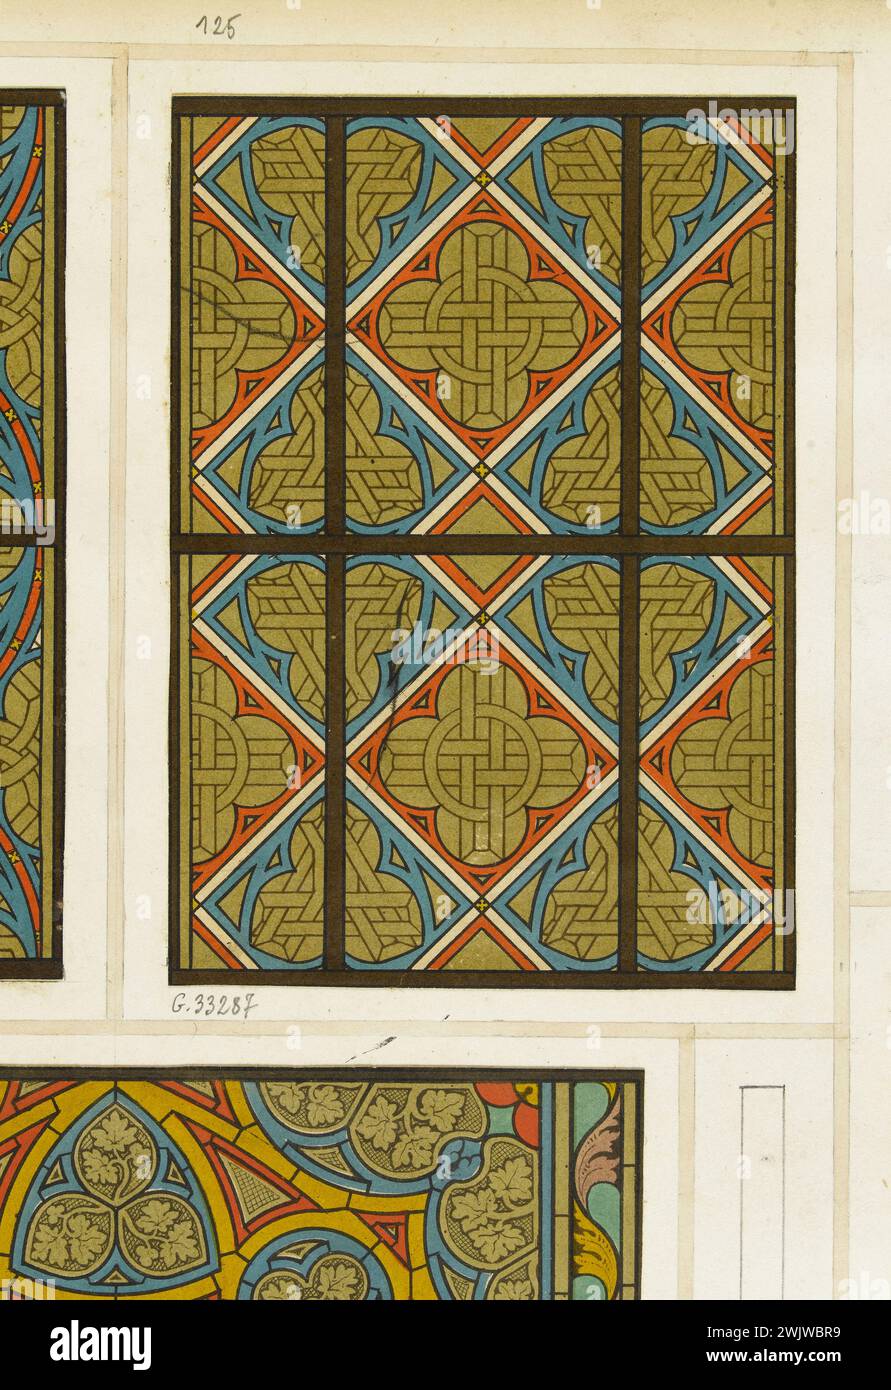 GSELL-Laurent workshop. Album n ° 3; Stained glass motive: quadrilobes and trilobes inscribed in diamonds. Chromolithography. Paris, Carnavalet museum. Album n ° 3, chromolithography, diamond, pattern, quadrilobe, registered trilobe, stained glass Stock Photo